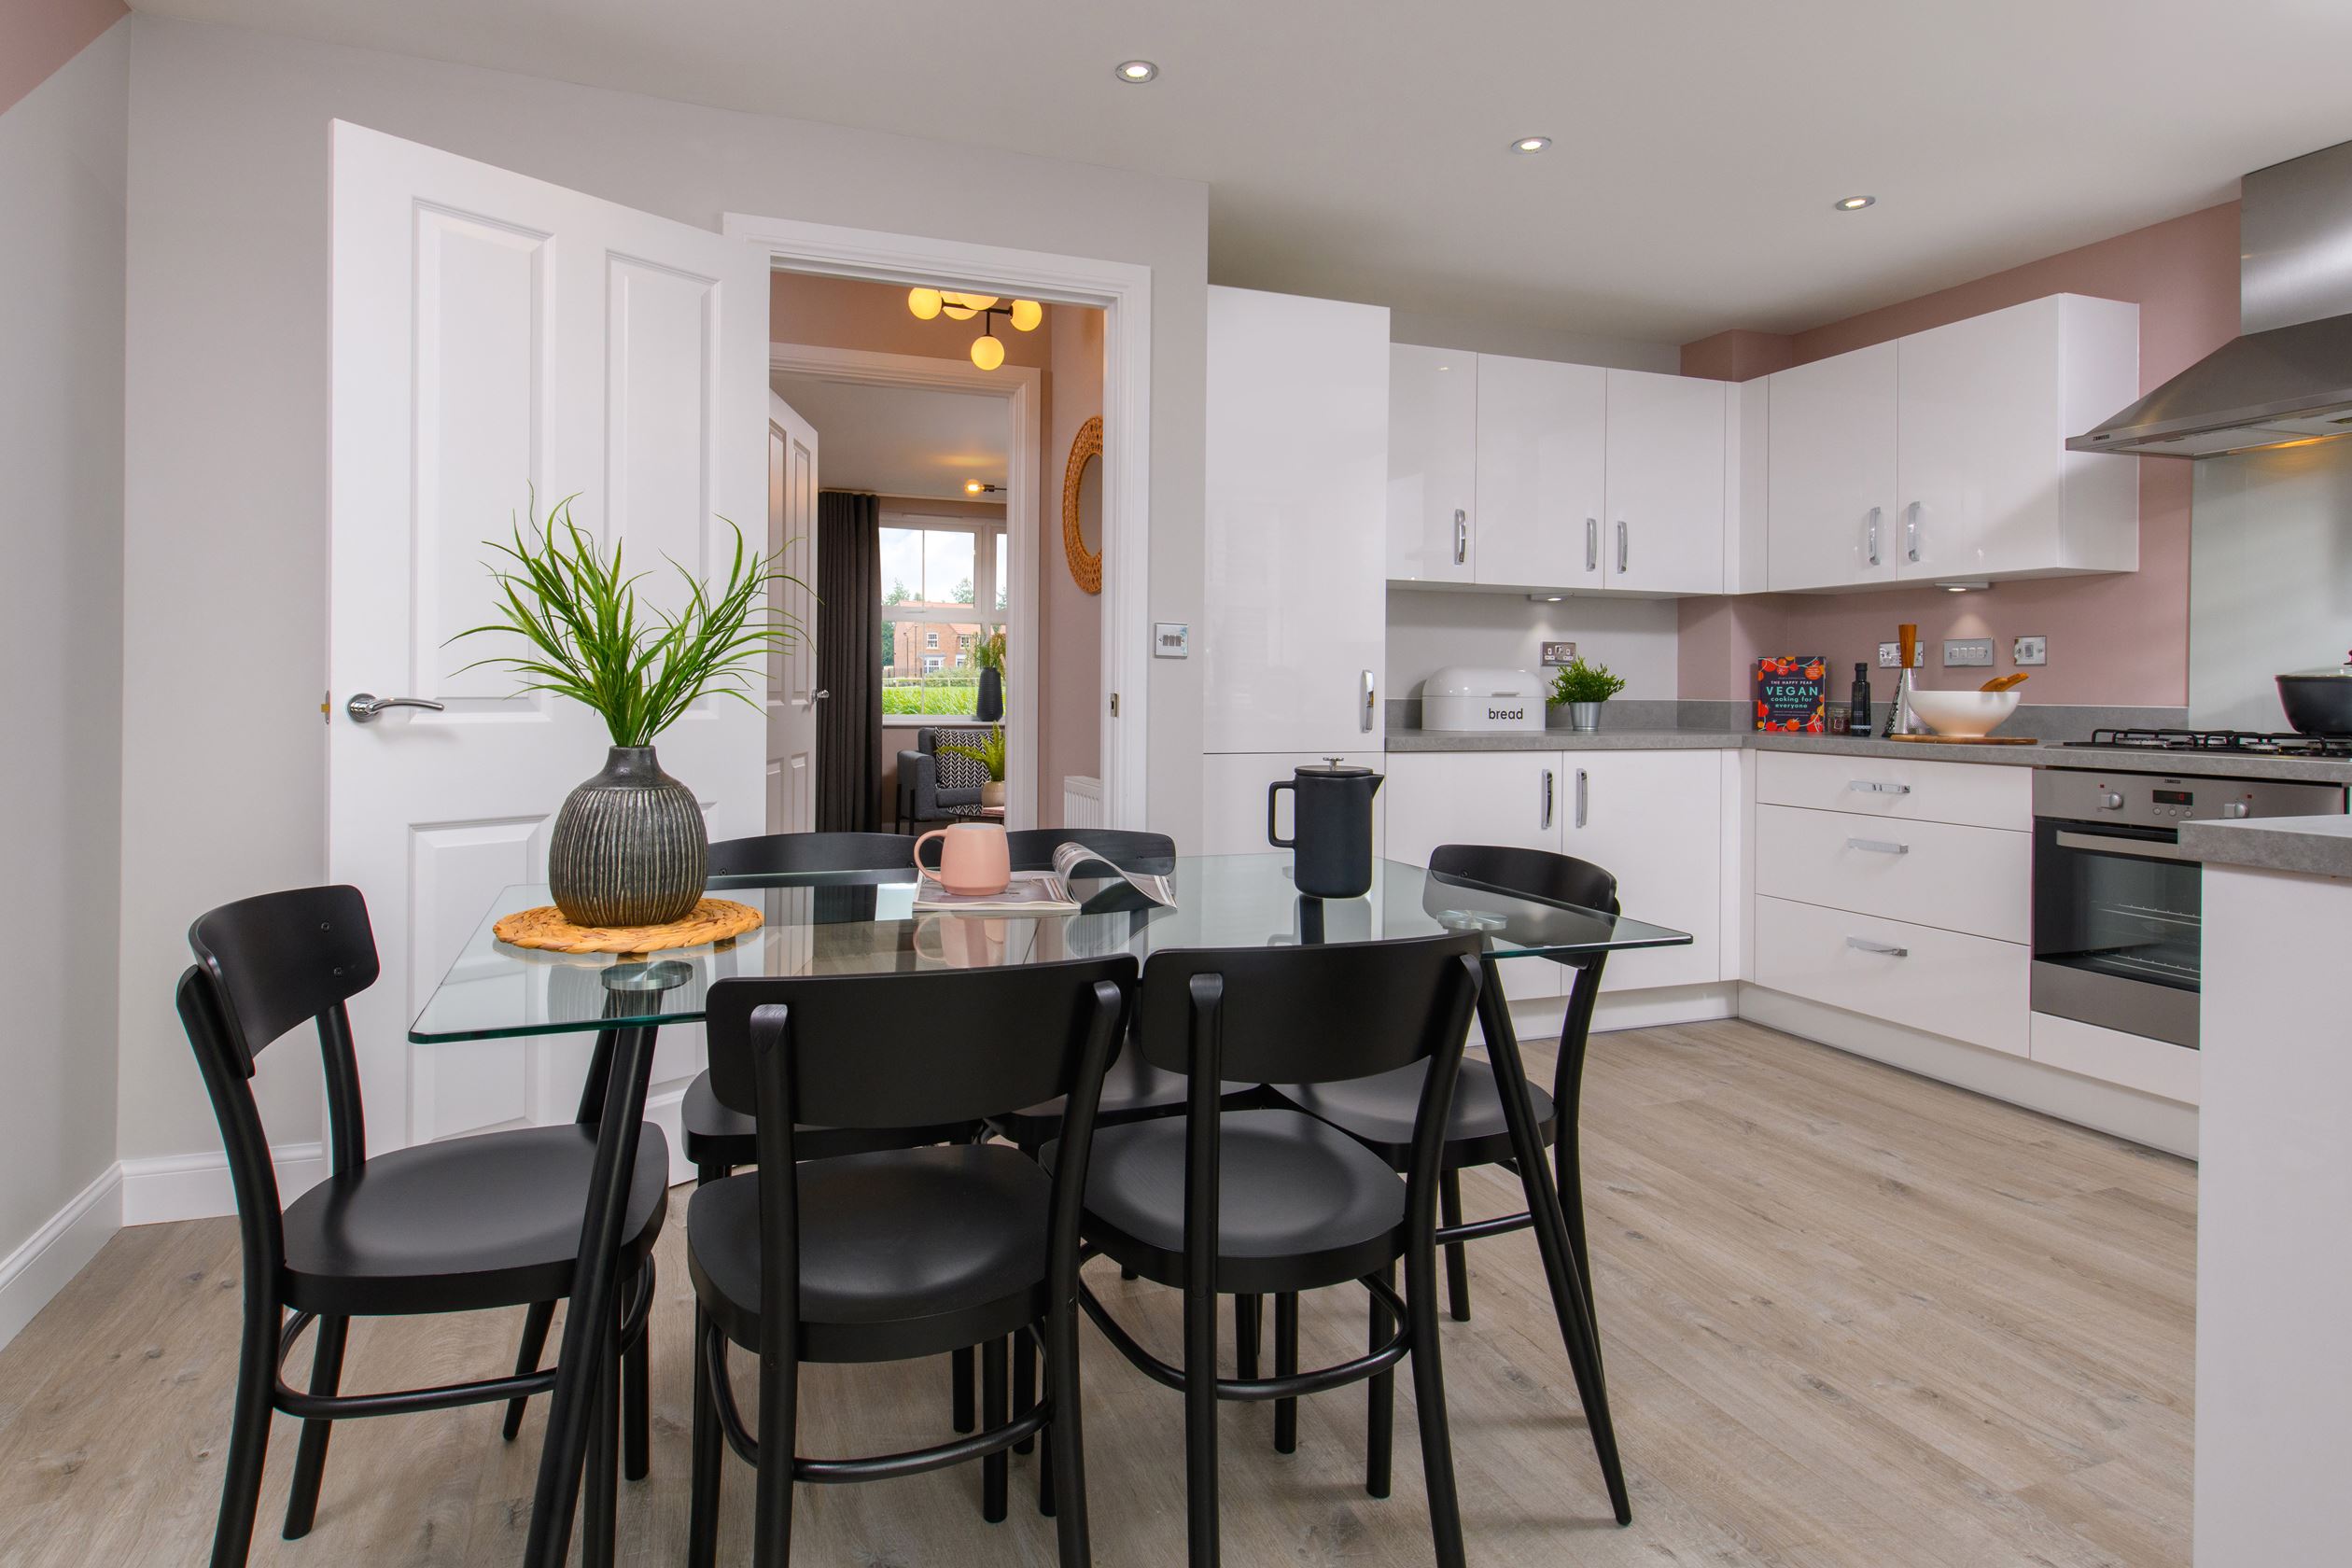 Property 3 of 8. Dining Area In The Kitchen Of The Archford Show Home